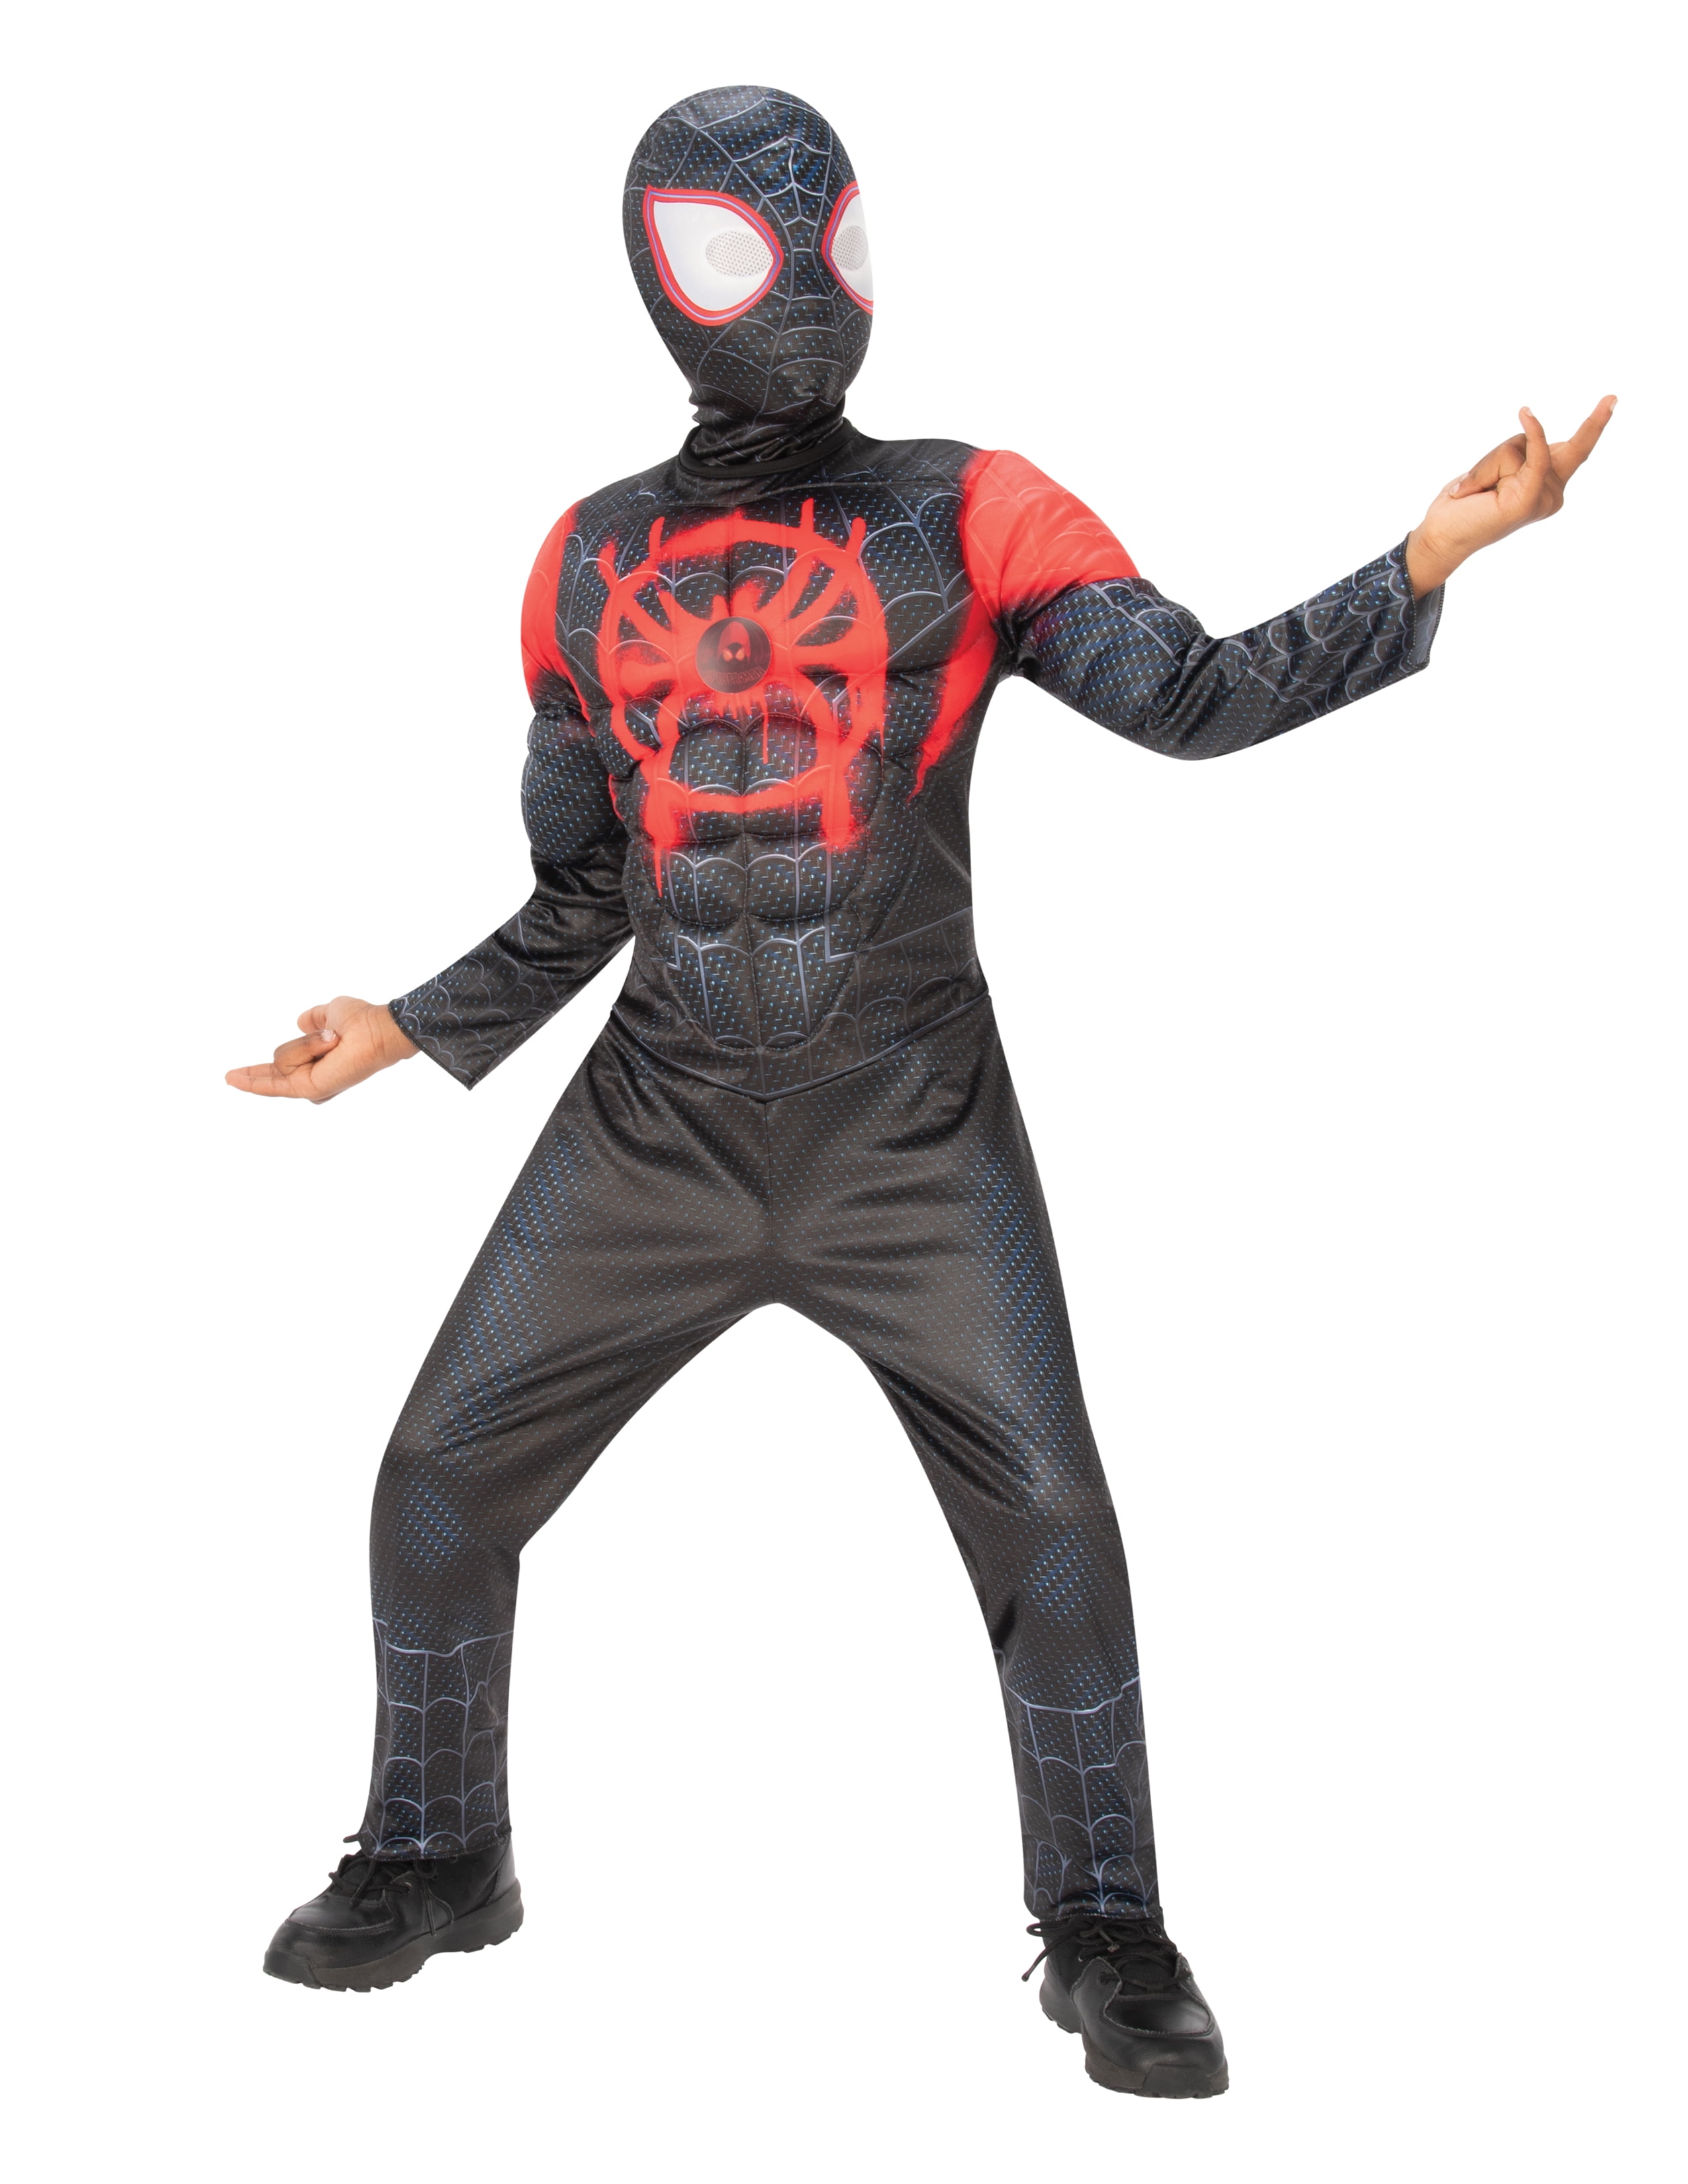 Kids Boy Spiderman Costume Fancy Dress Cosplay Party Tops Pants Mask Outfit Set 